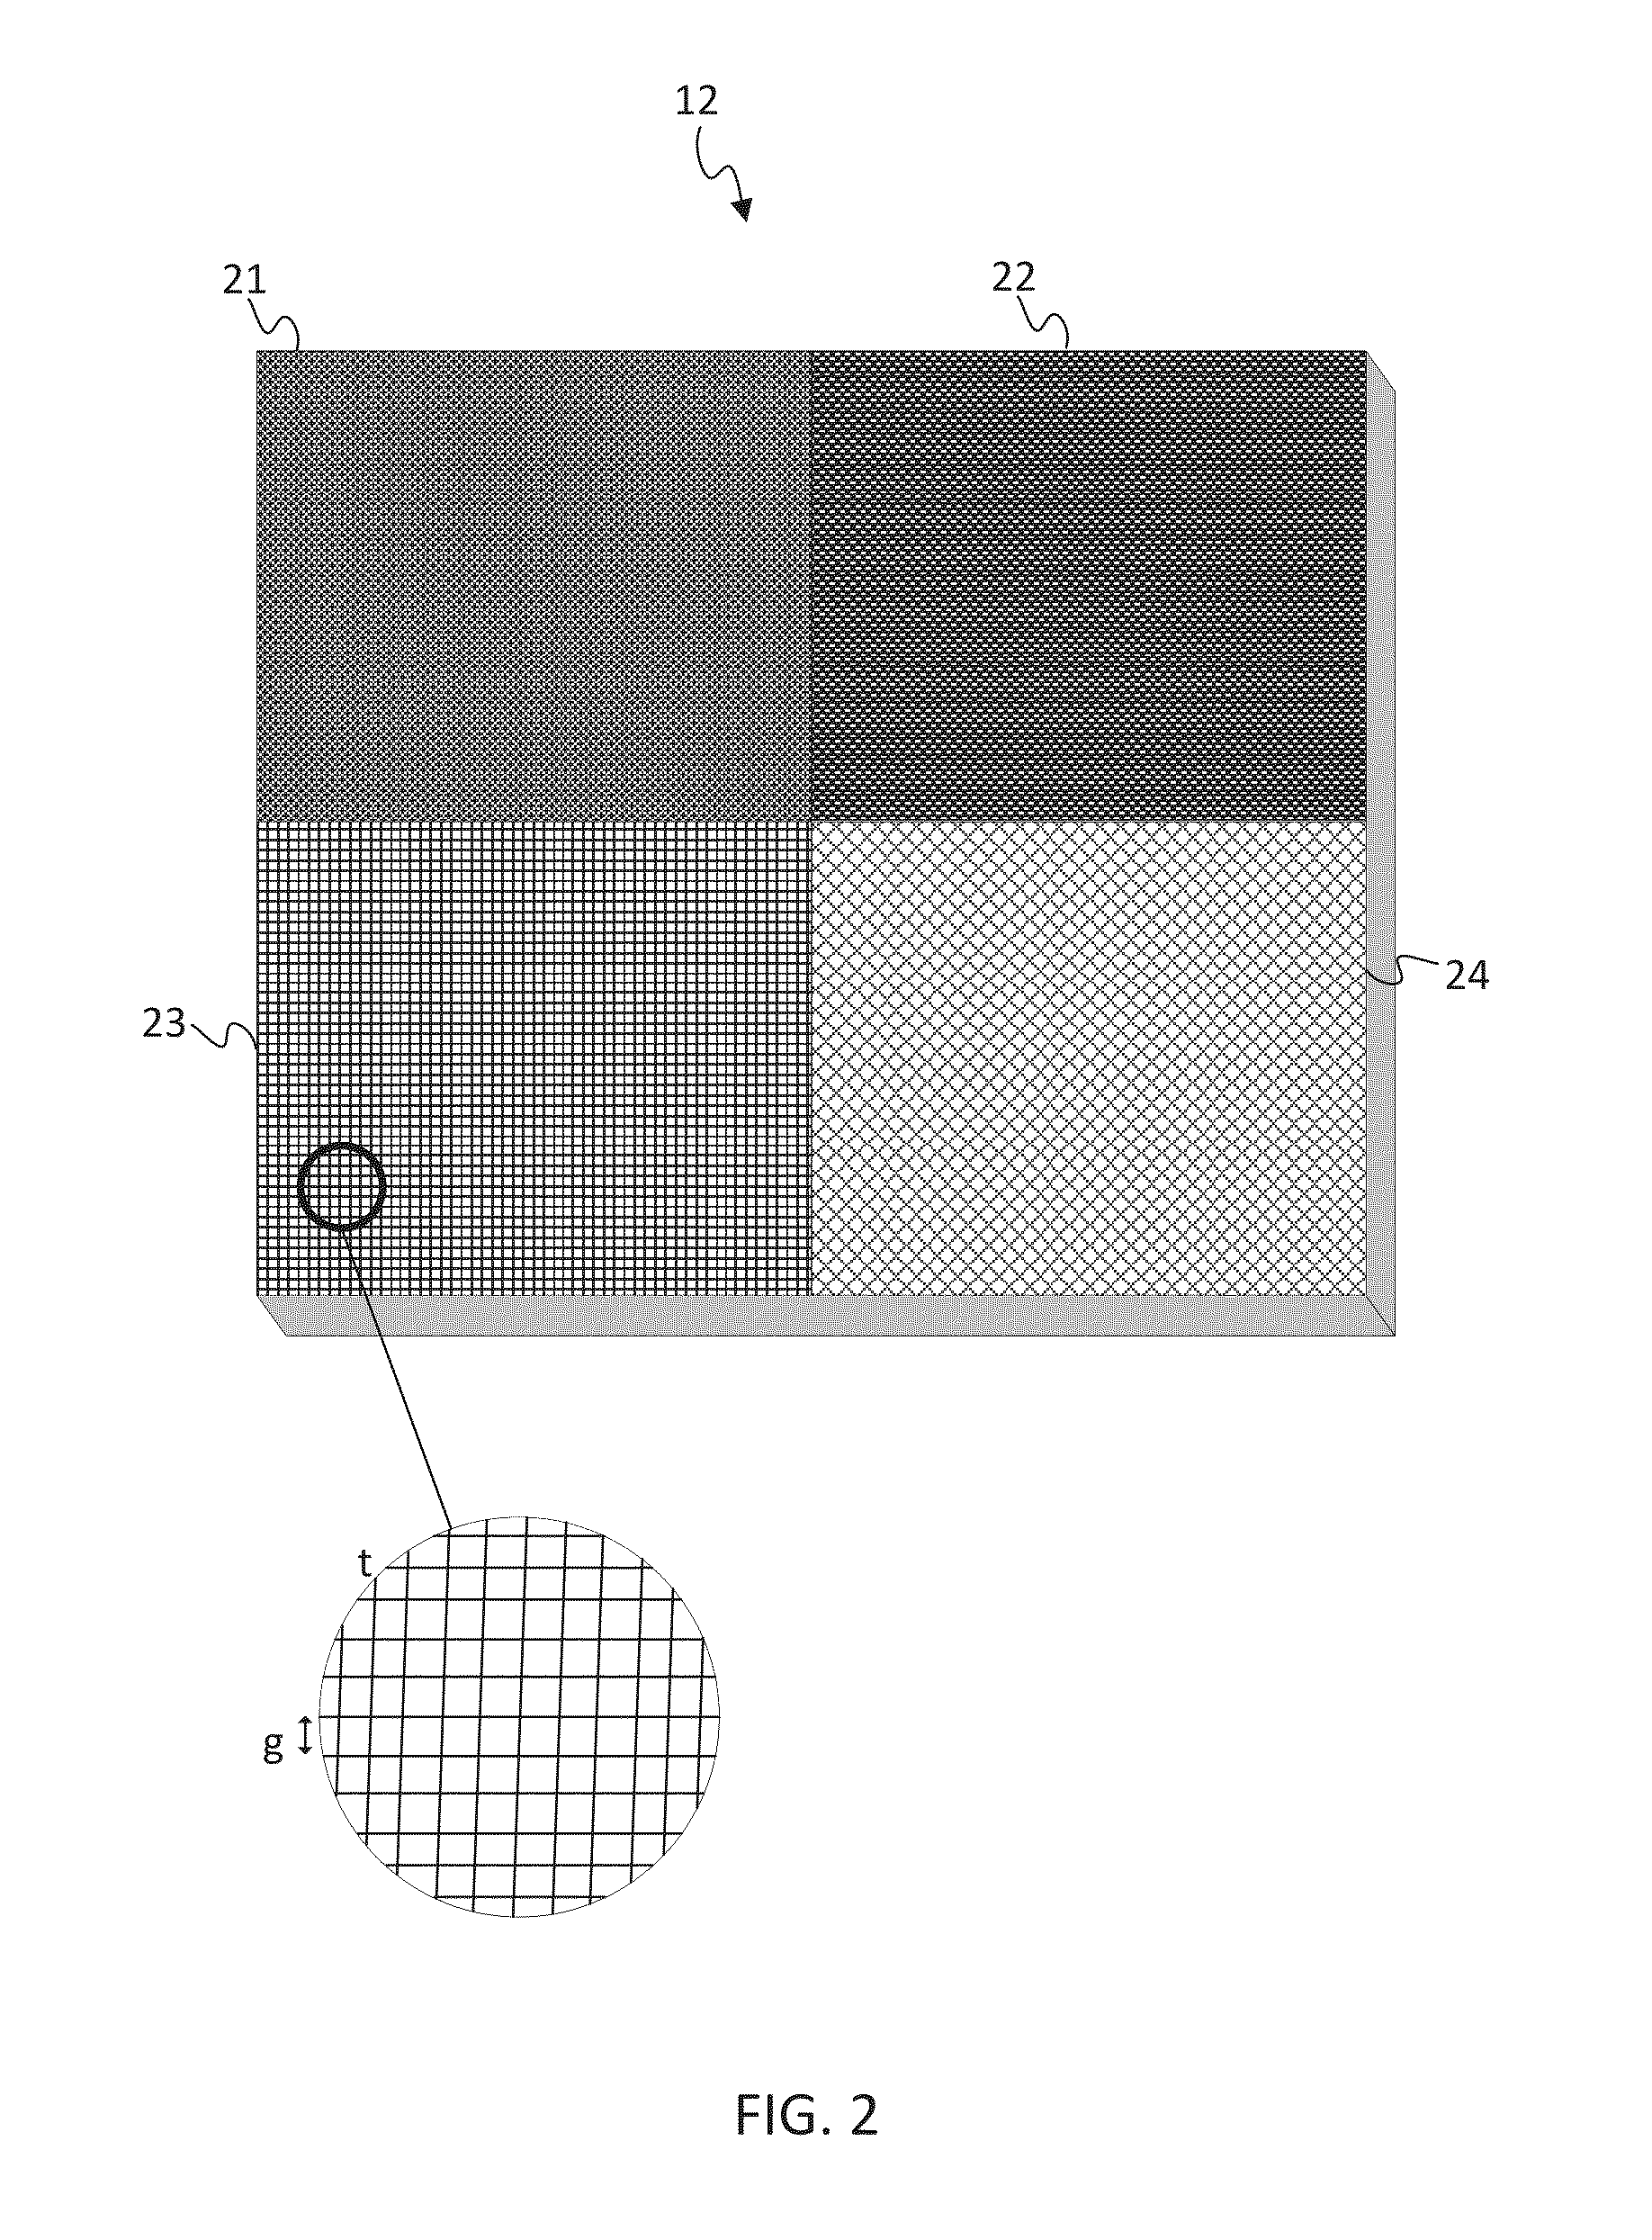 Current Redistribution in a Printed Circuit Board